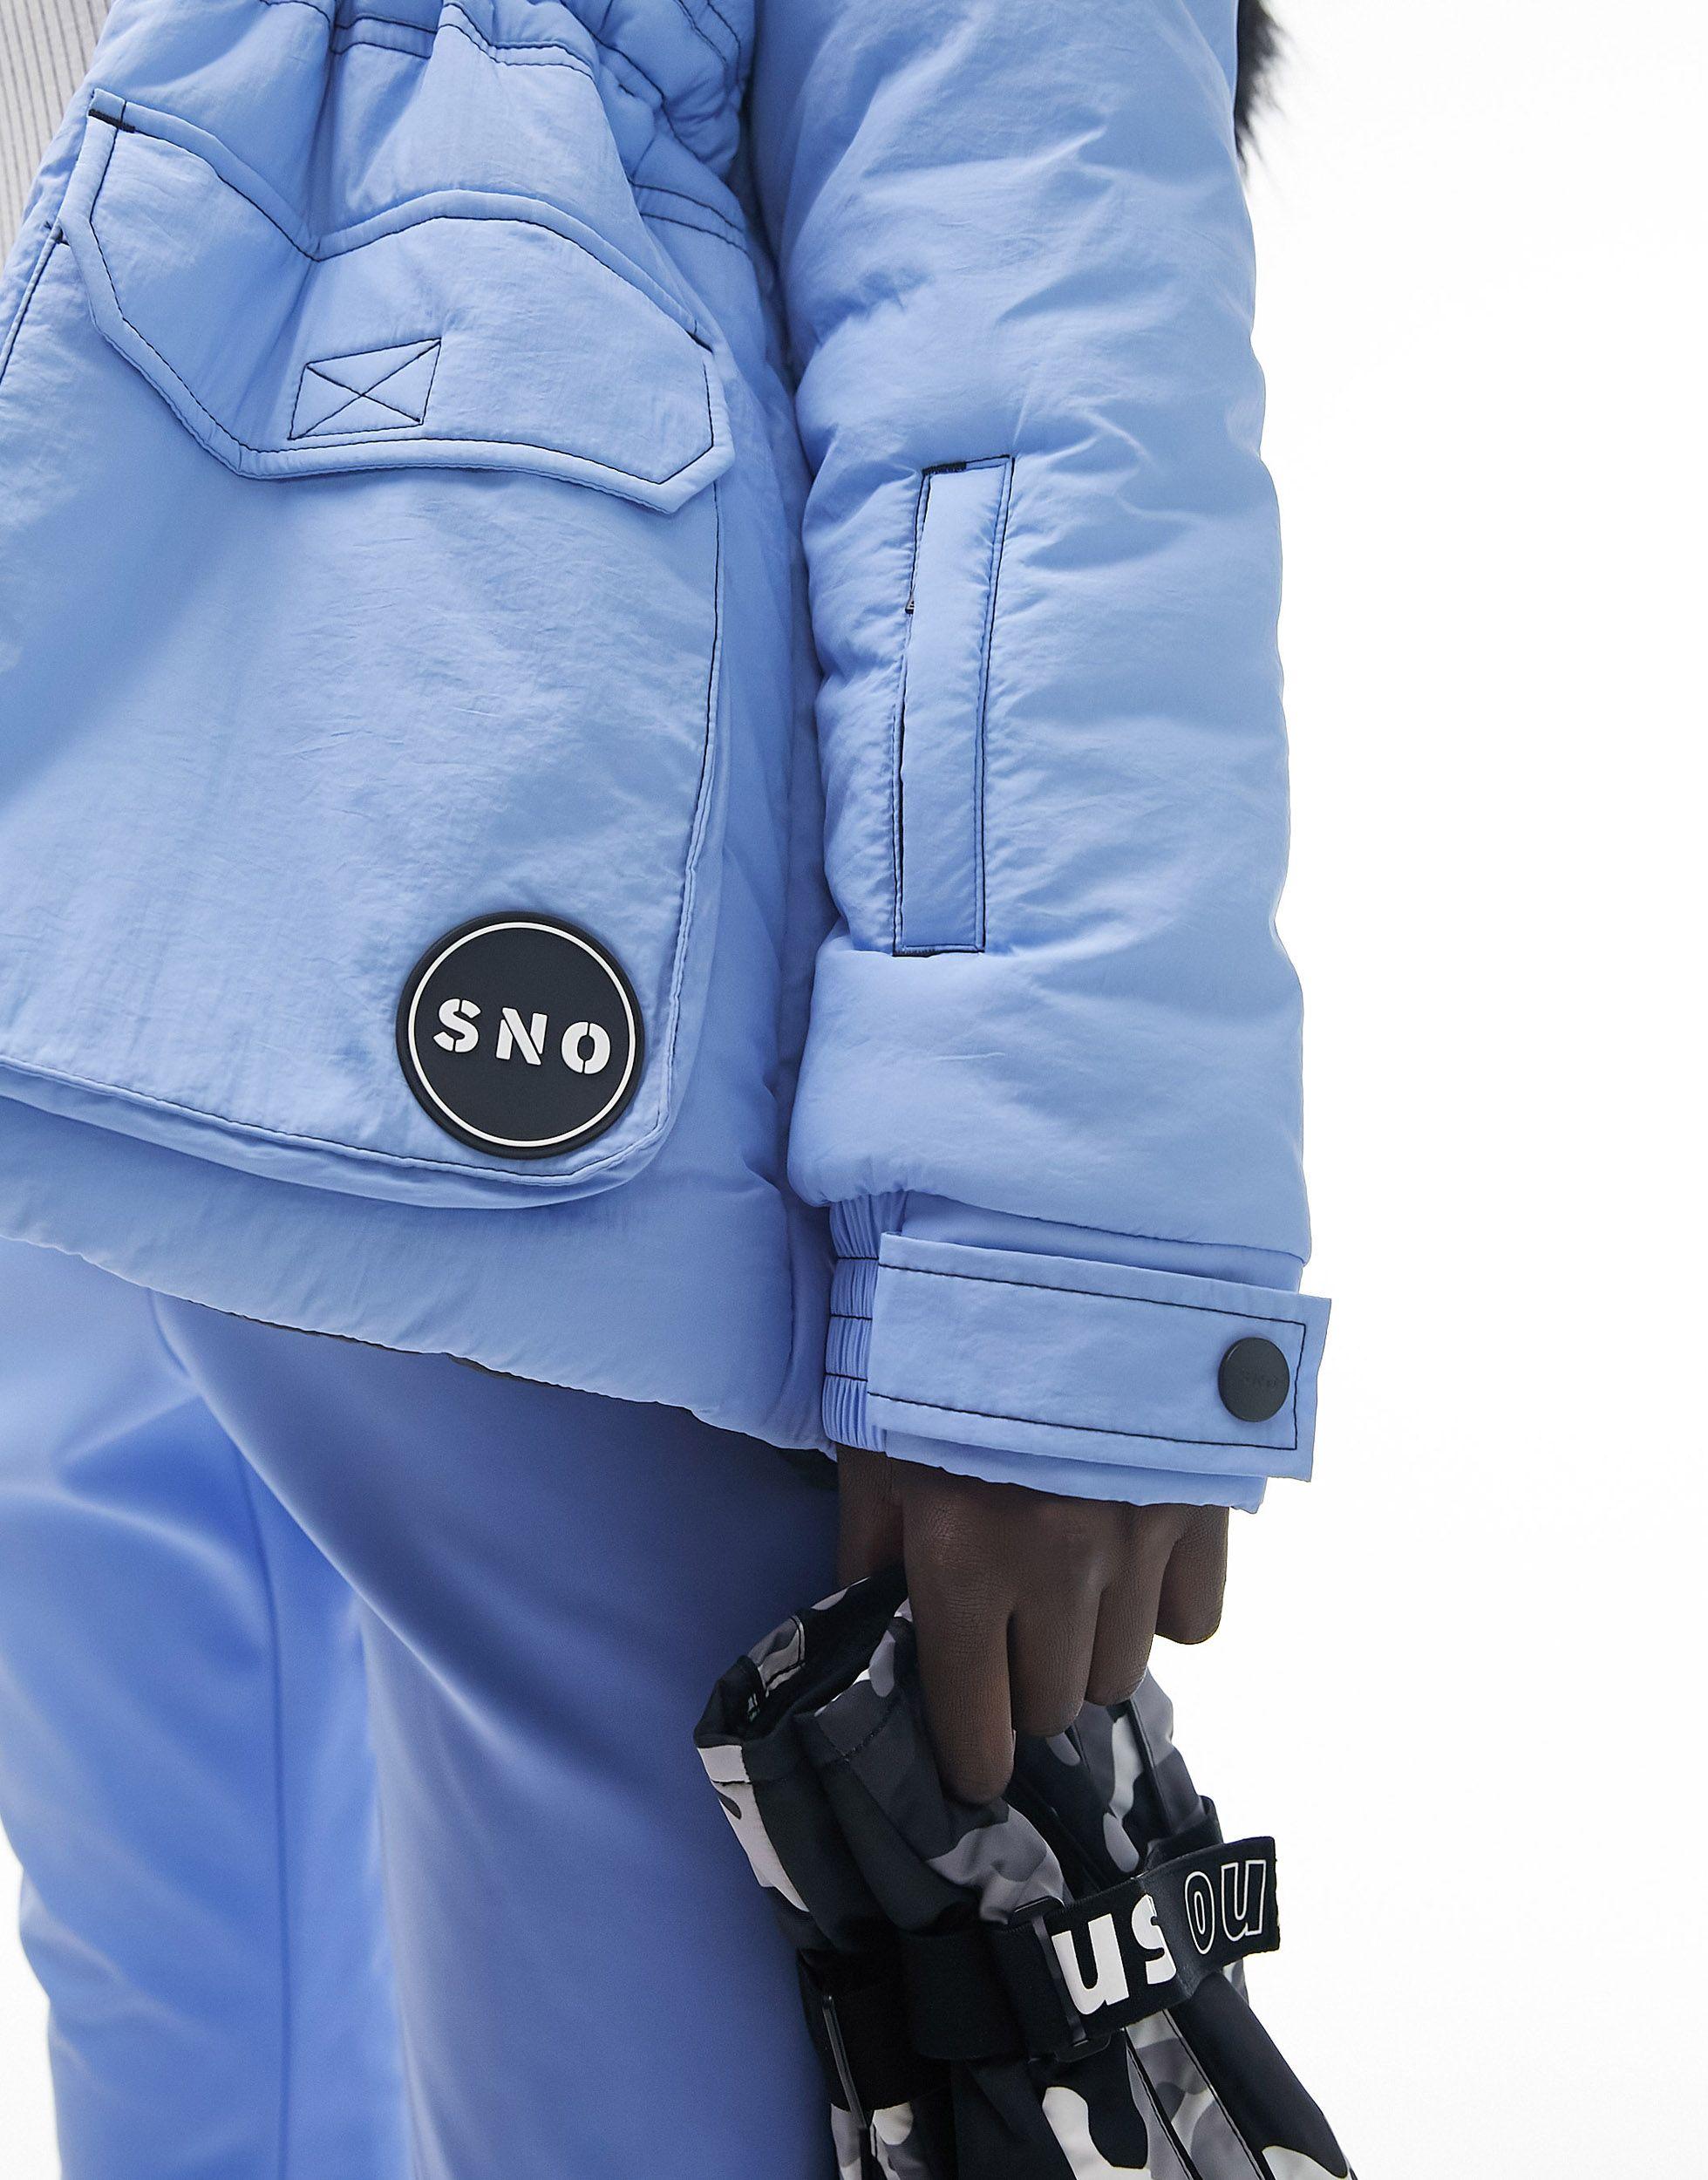 TOPSHOP Sno Ski Parka Coat With Faux Fur Hood in Blue | Lyst